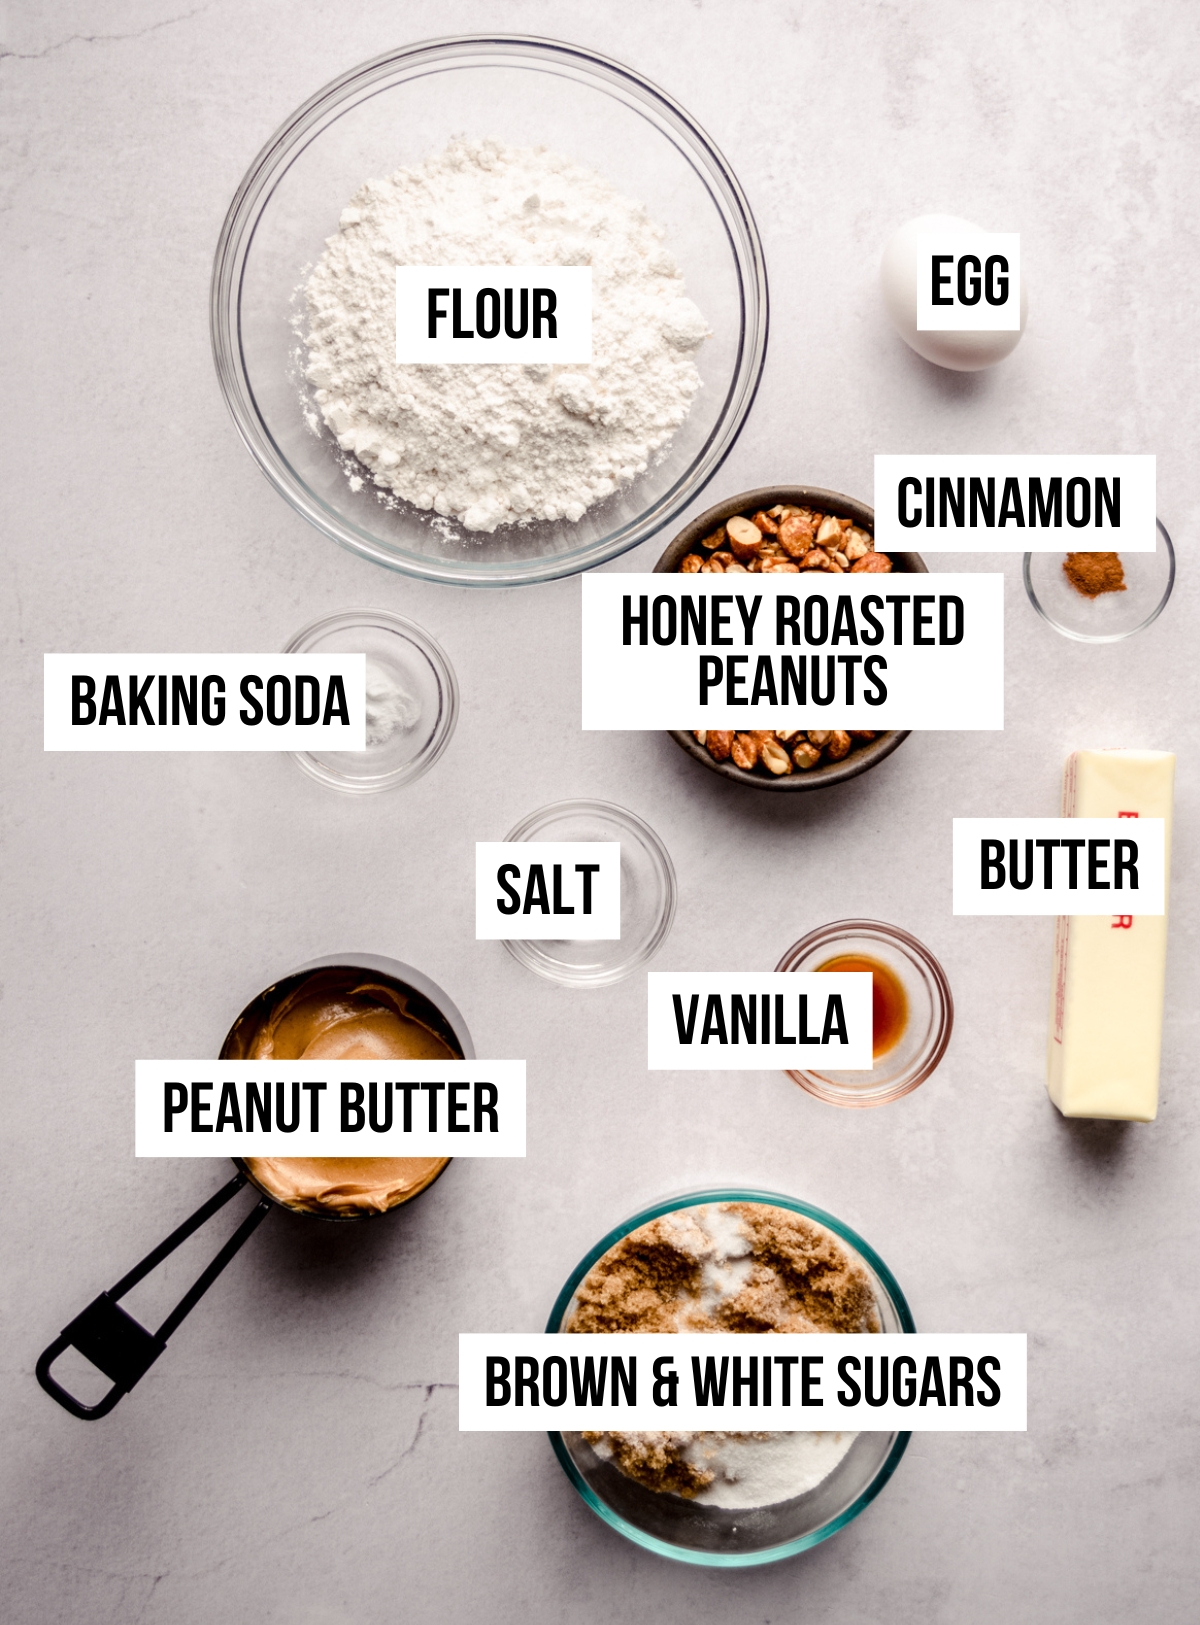 Aerial photo of ingredients for frosted peanut butter cookies with text overlay.